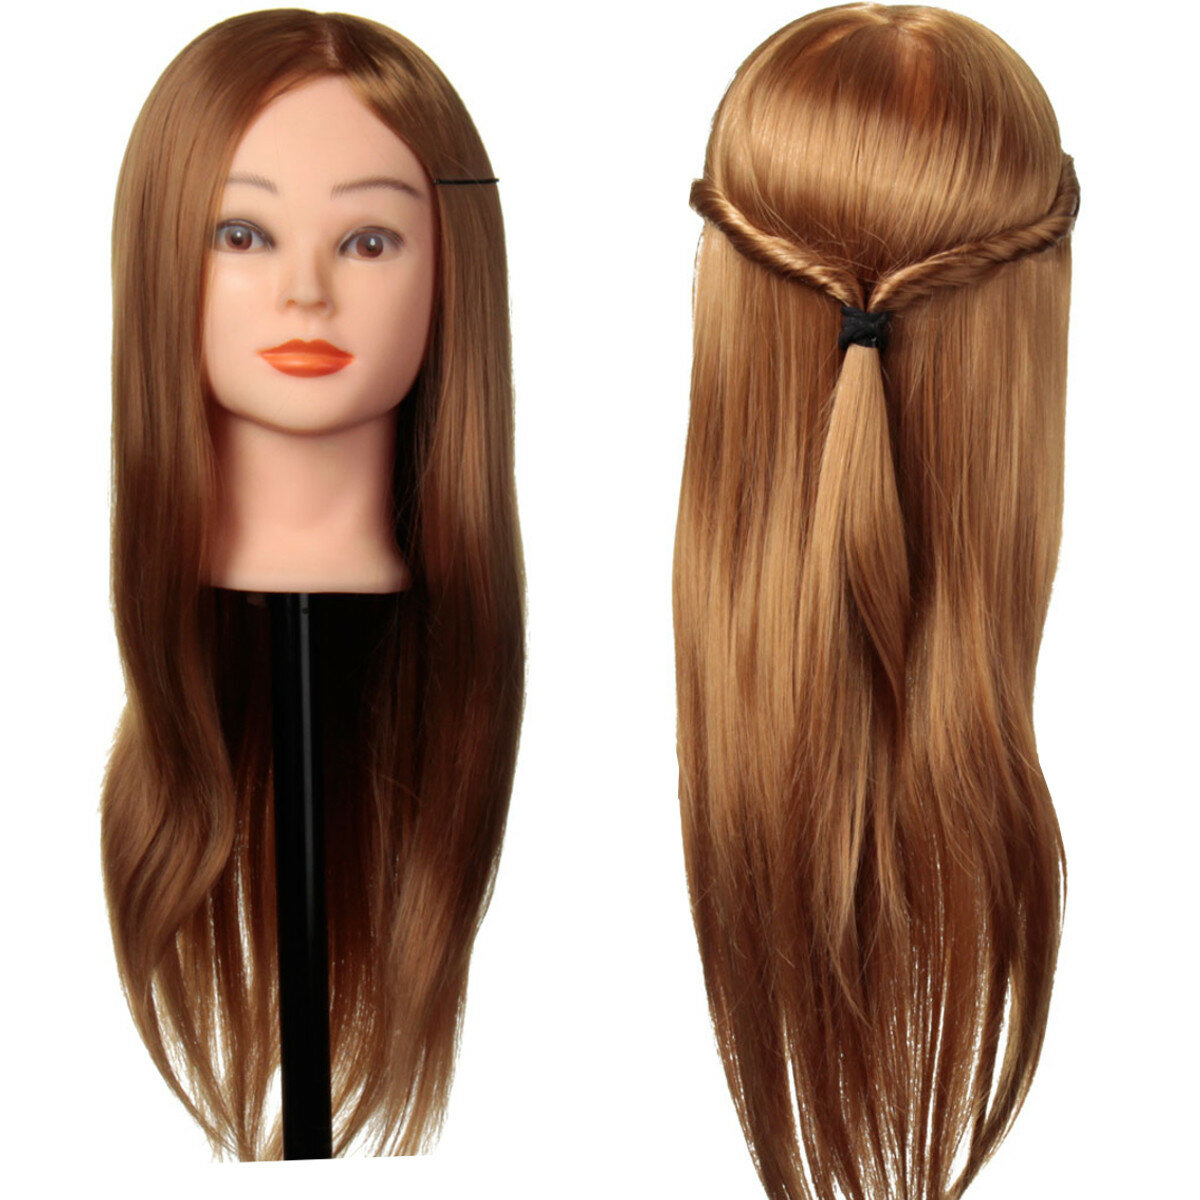 24 Inch 30% Real Long Human Hair Hairdressing Training Head Practice Model With Clamp Holder